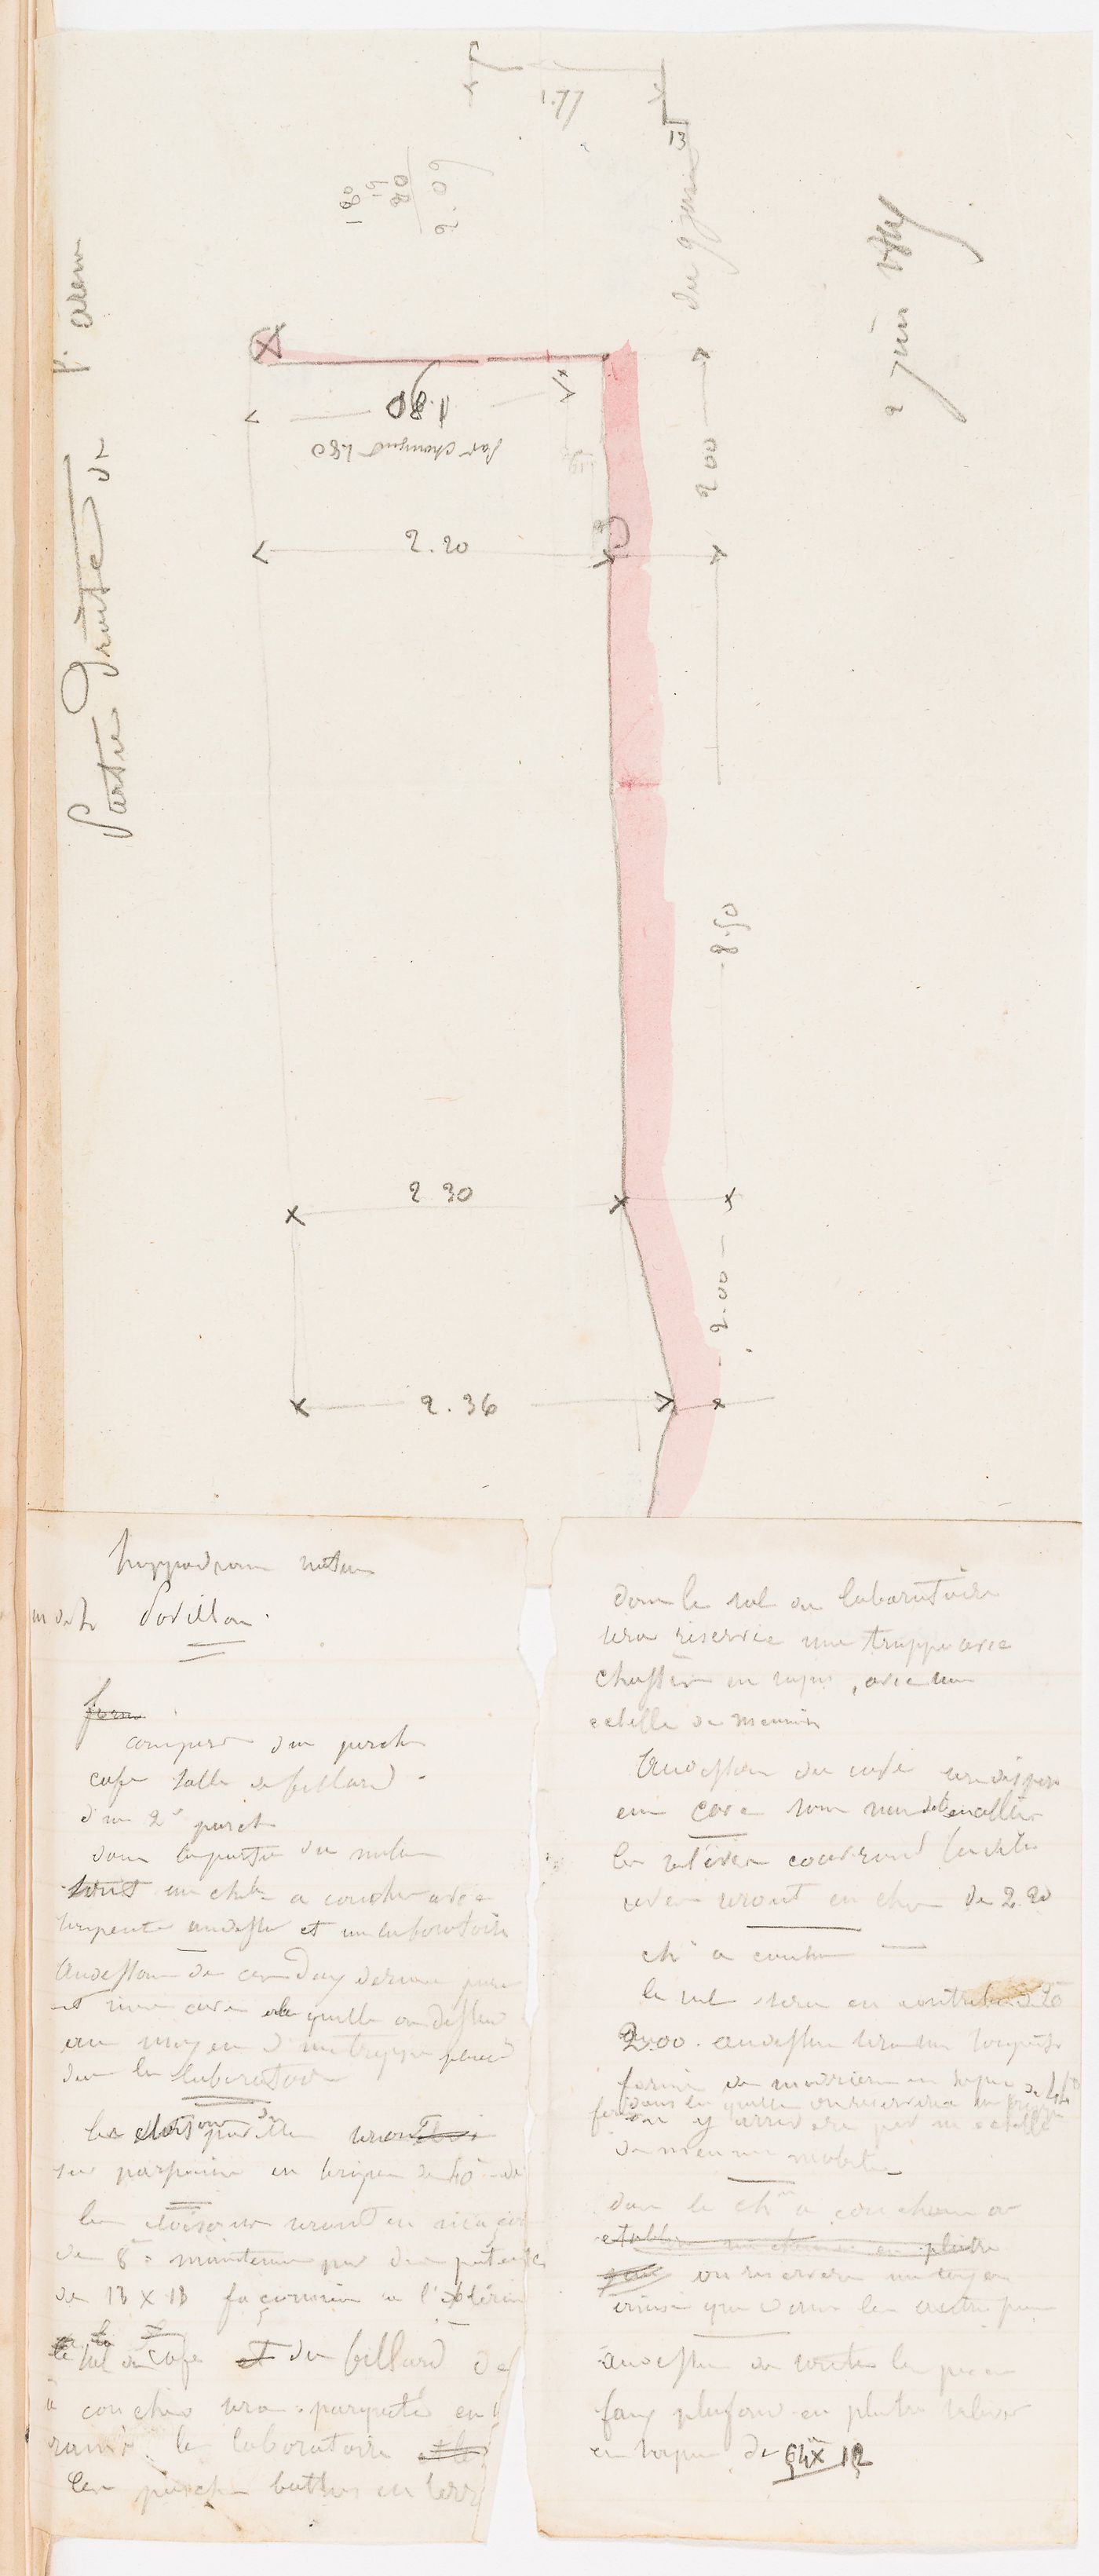 Hippodrome national, Paris: Profile of the site contours and notes